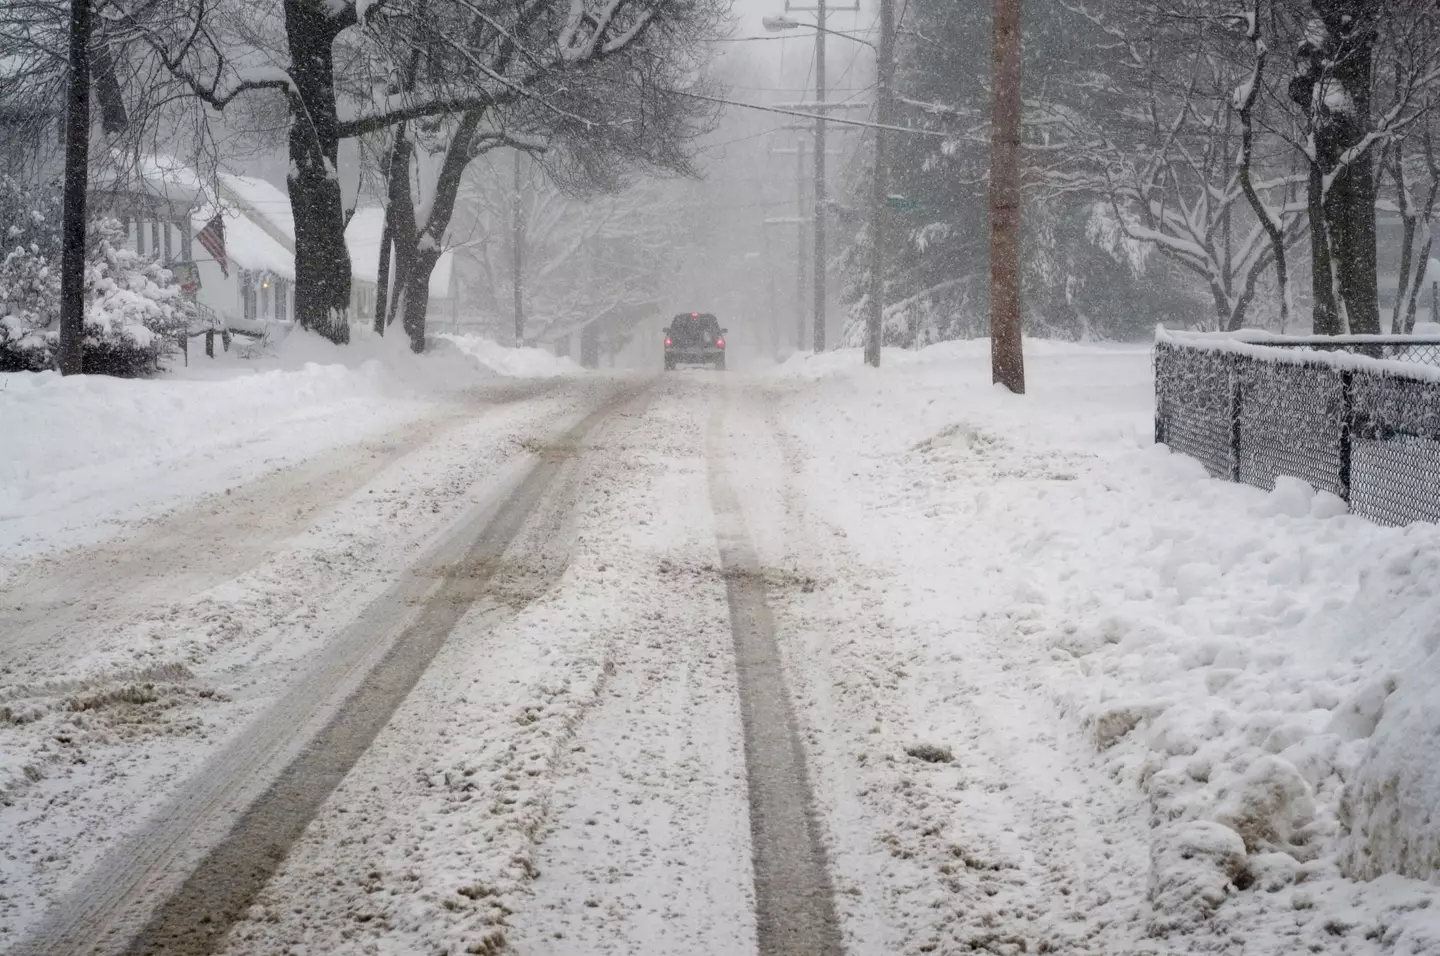 The winter storm has caused huge travel disruption across the US.